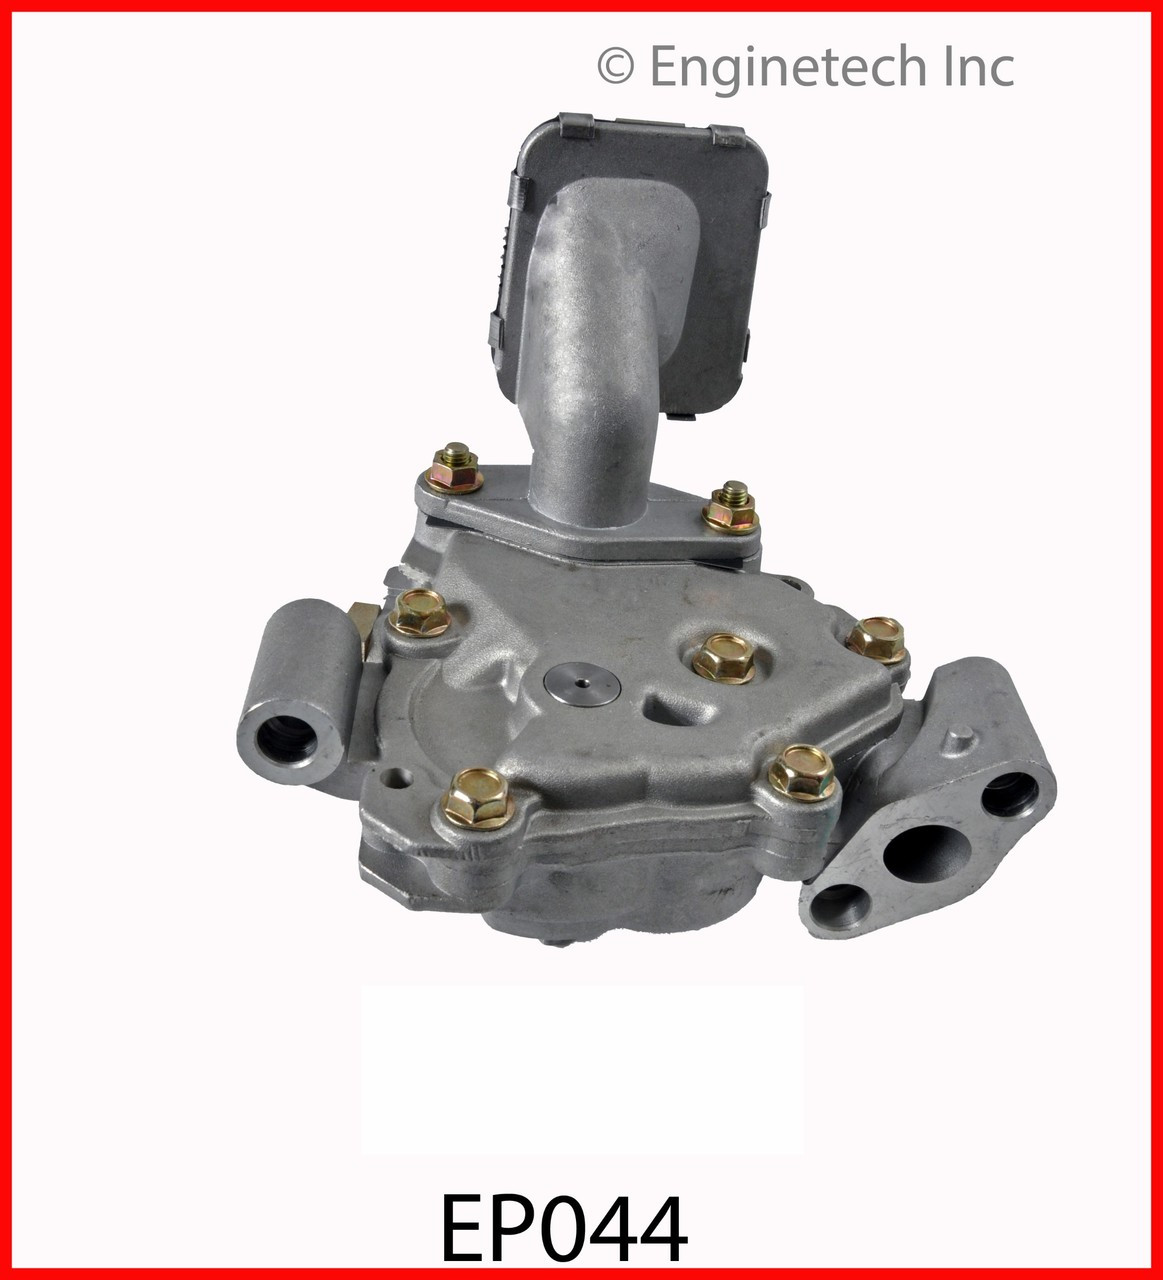 Oil Pump - 2009 Toyota Camry 2.4L (EP044.D38)